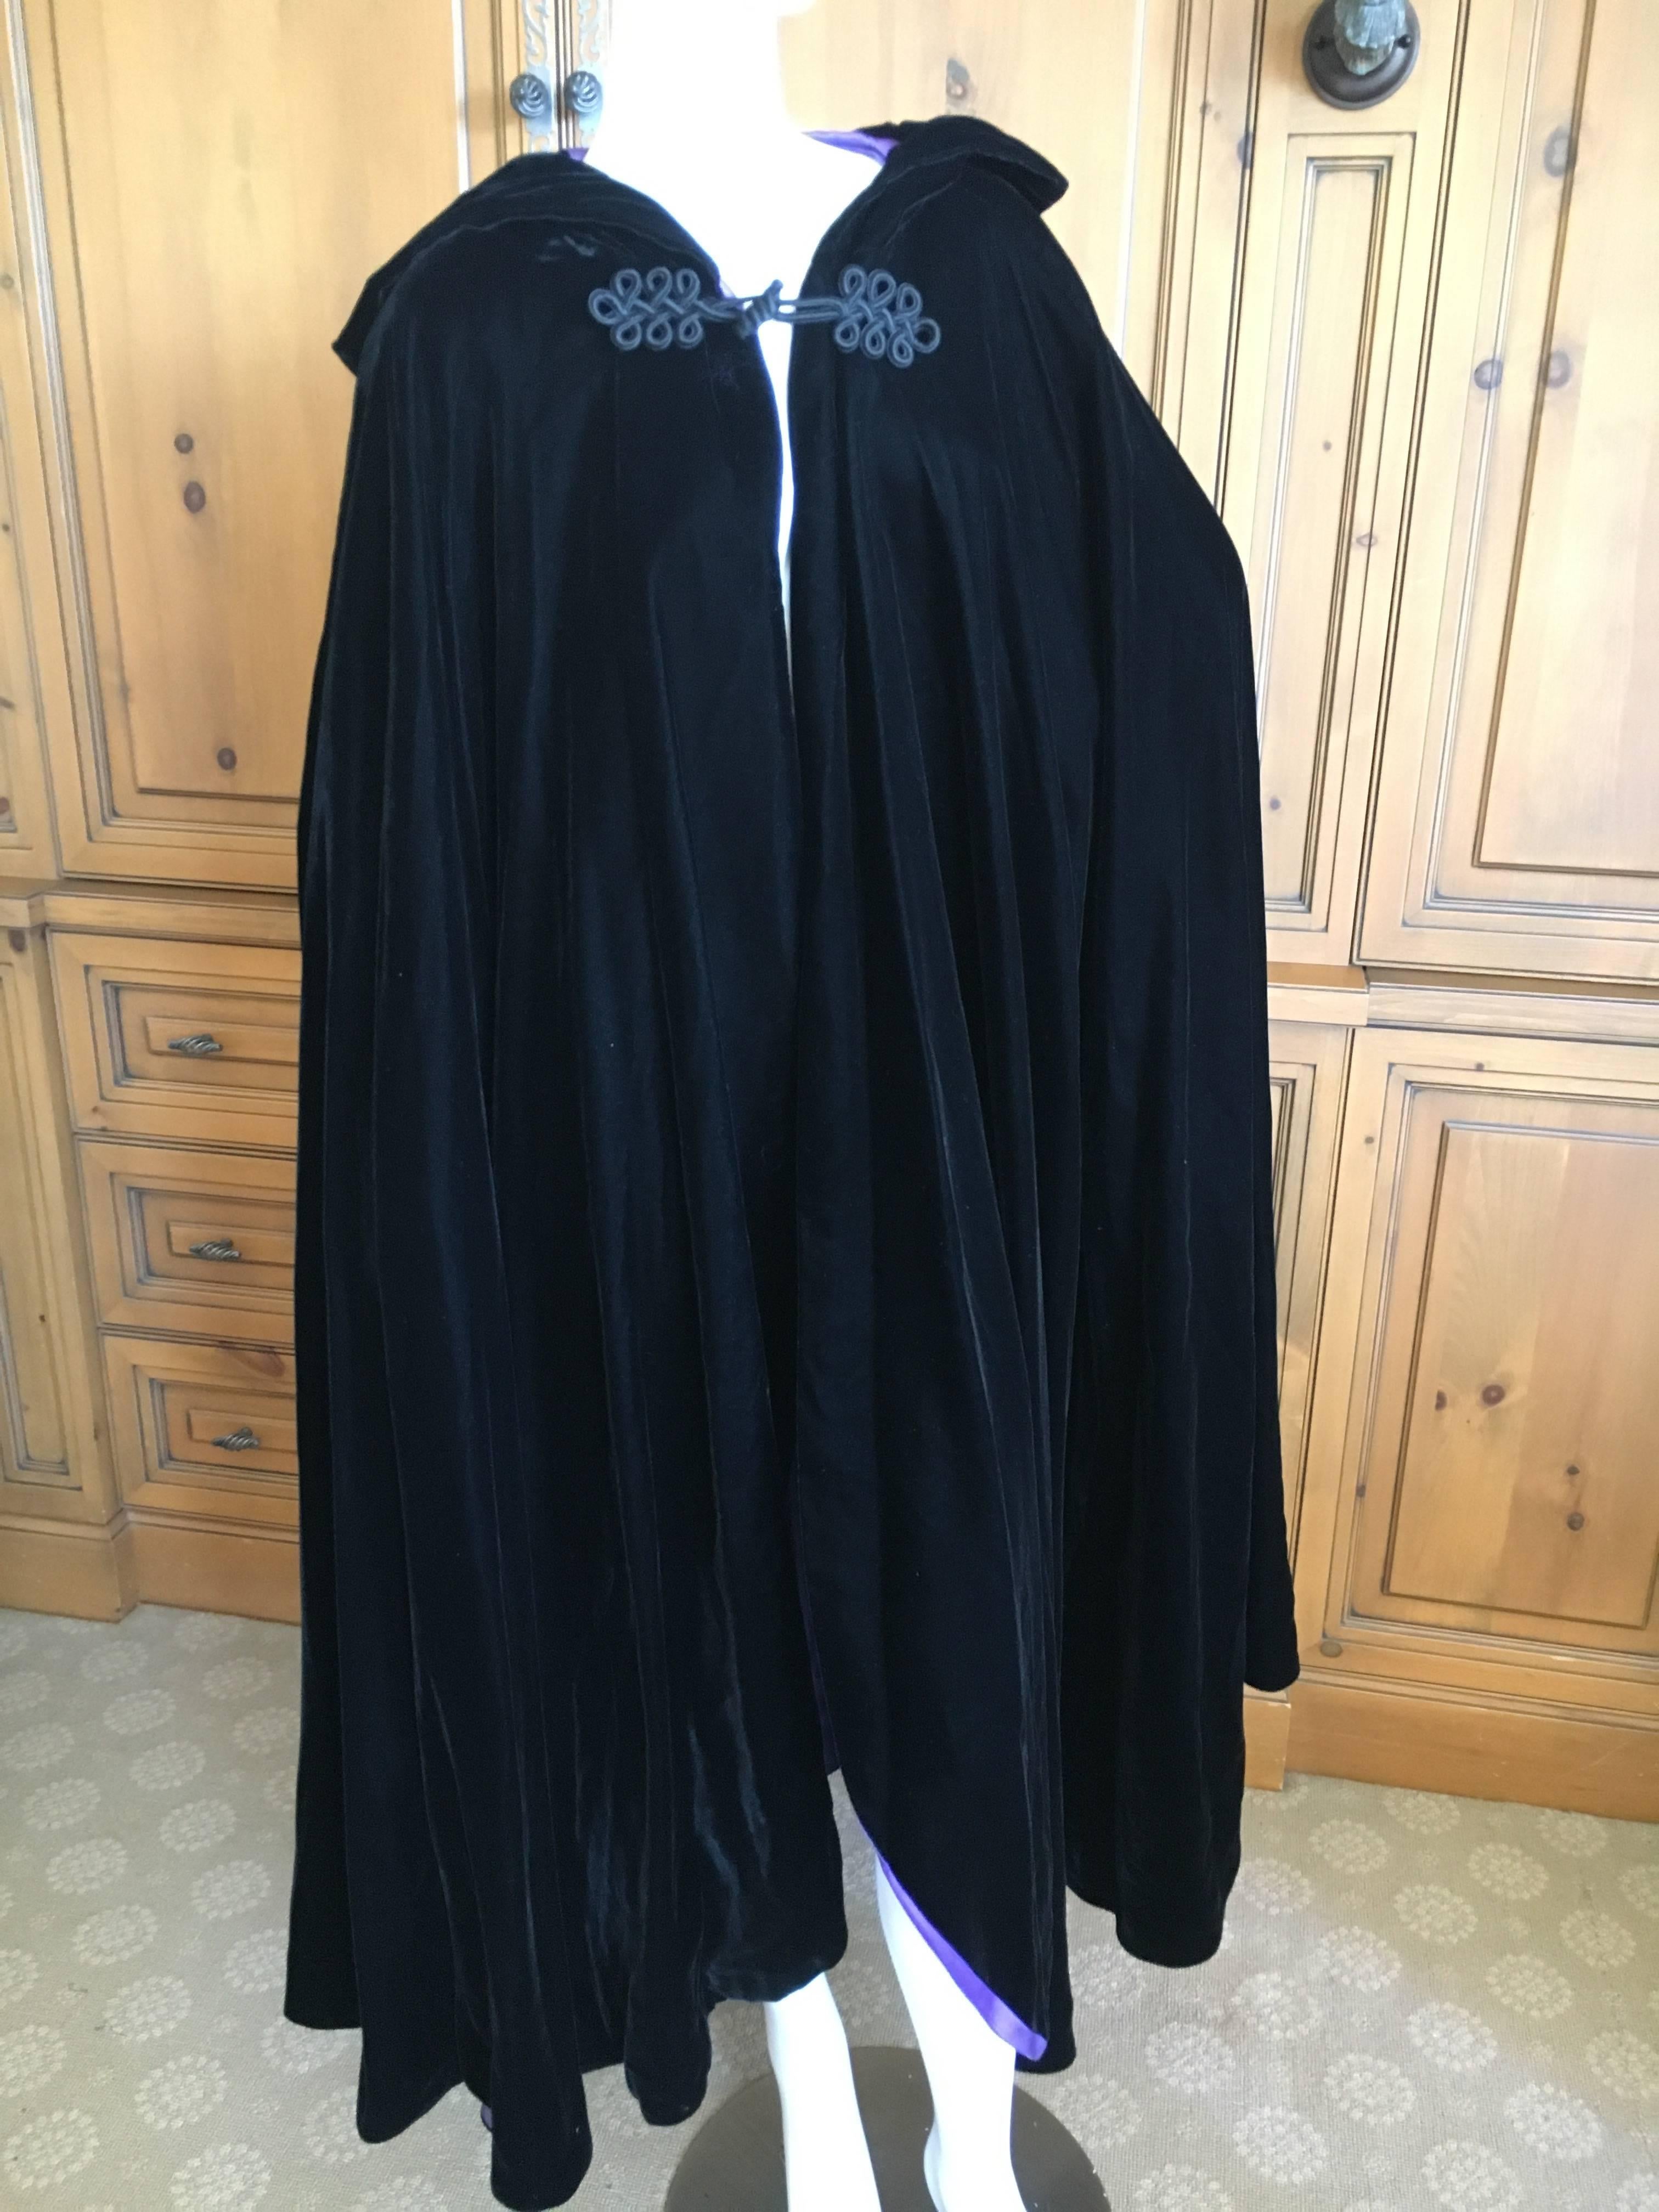 Christian Dior Vintage Black Velvet Cape with Hood and Soutache Closure.
Lined in purple satin, this is so chic.
Length 48"
Excellent condition 